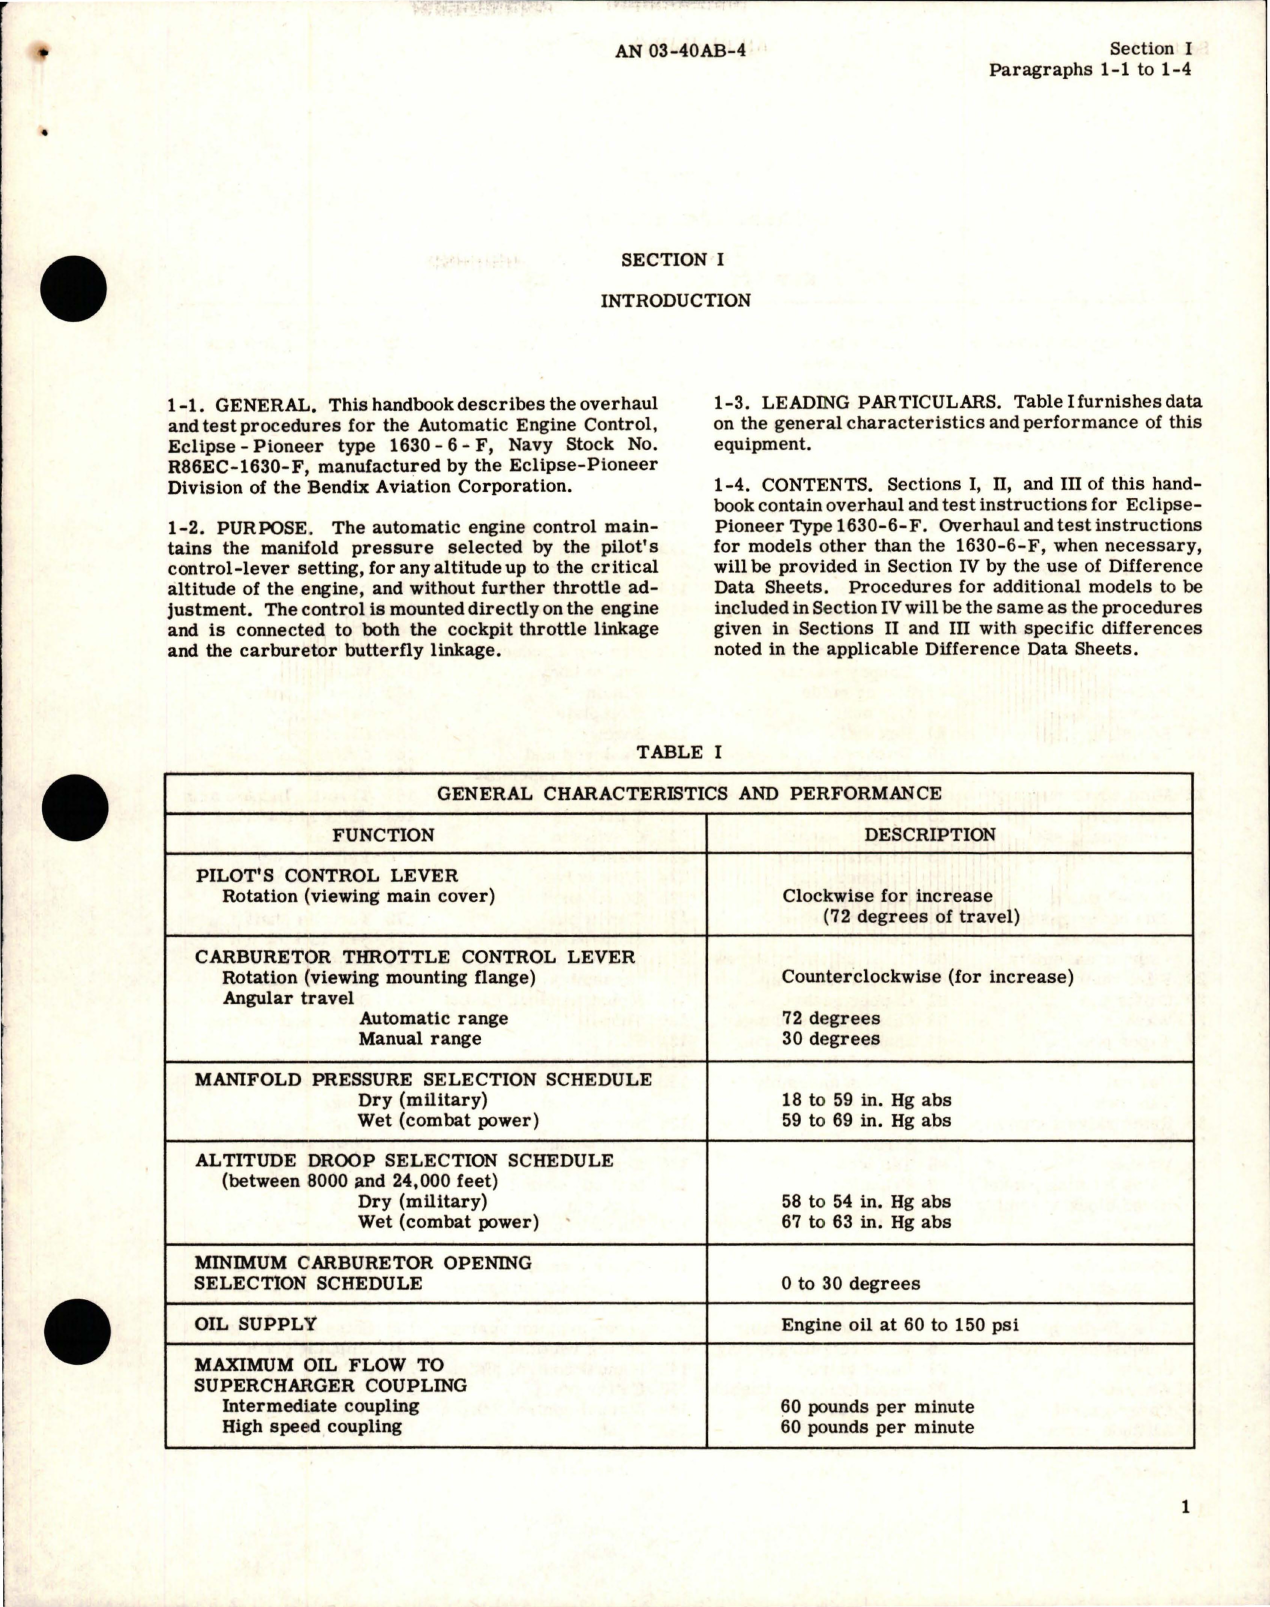 Sample page 5 from AirCorps Library document: Overhaul Instructions for Automatic Engine Control - Part 1630-6-F